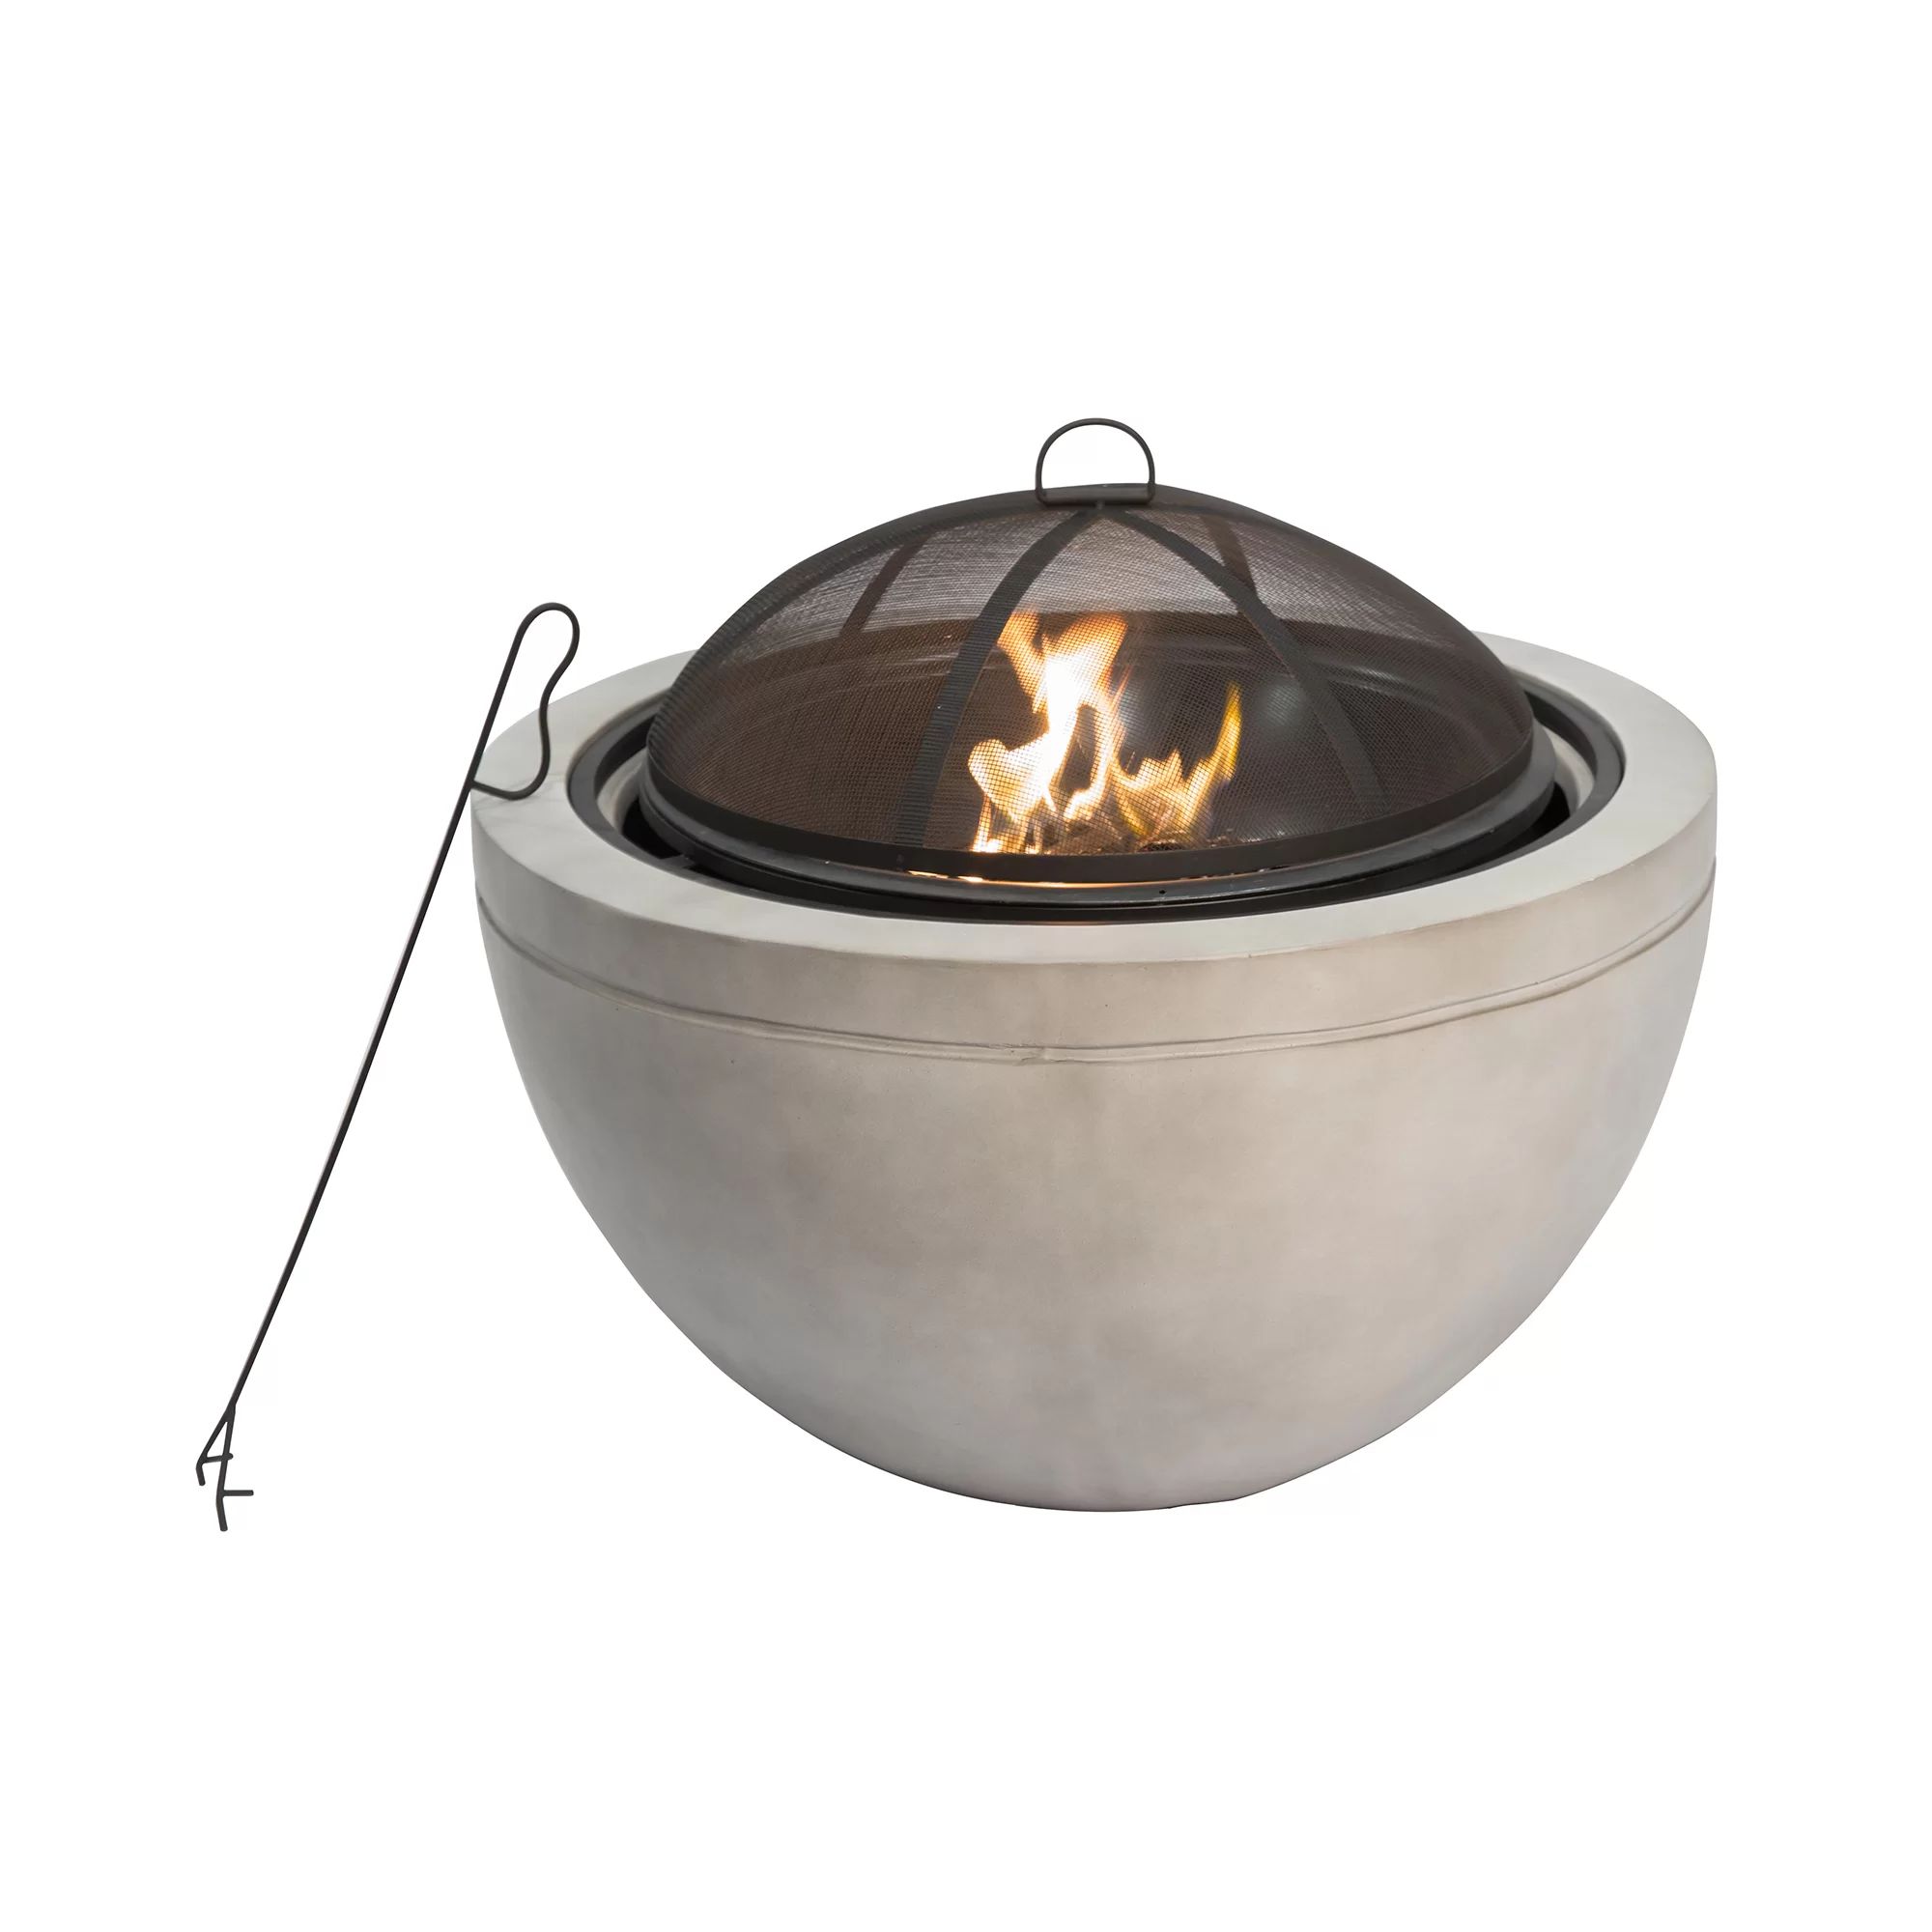 Colis 22.83'' H x 29.92'' W Concrete Wood Burning Outdoor Fire Pit | Wayfair North America